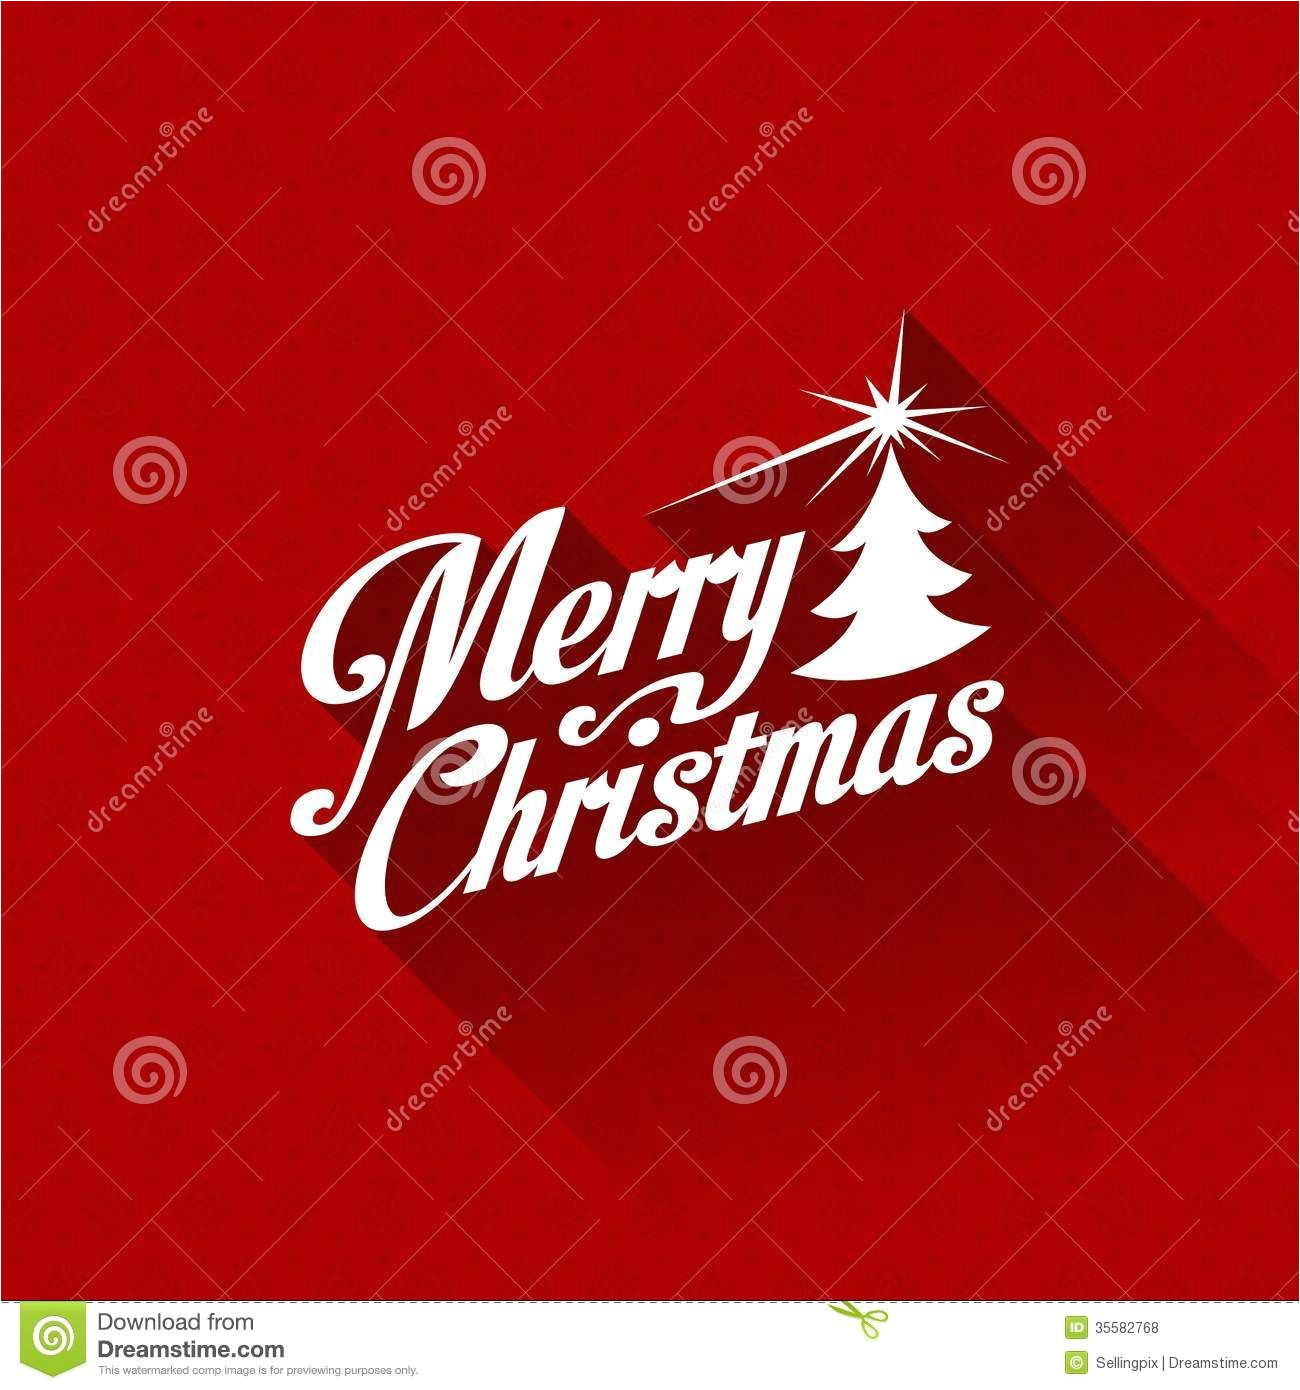 Xmas Greeting Card Free Download Merry Christmas Greeting Card Vector Design Templa